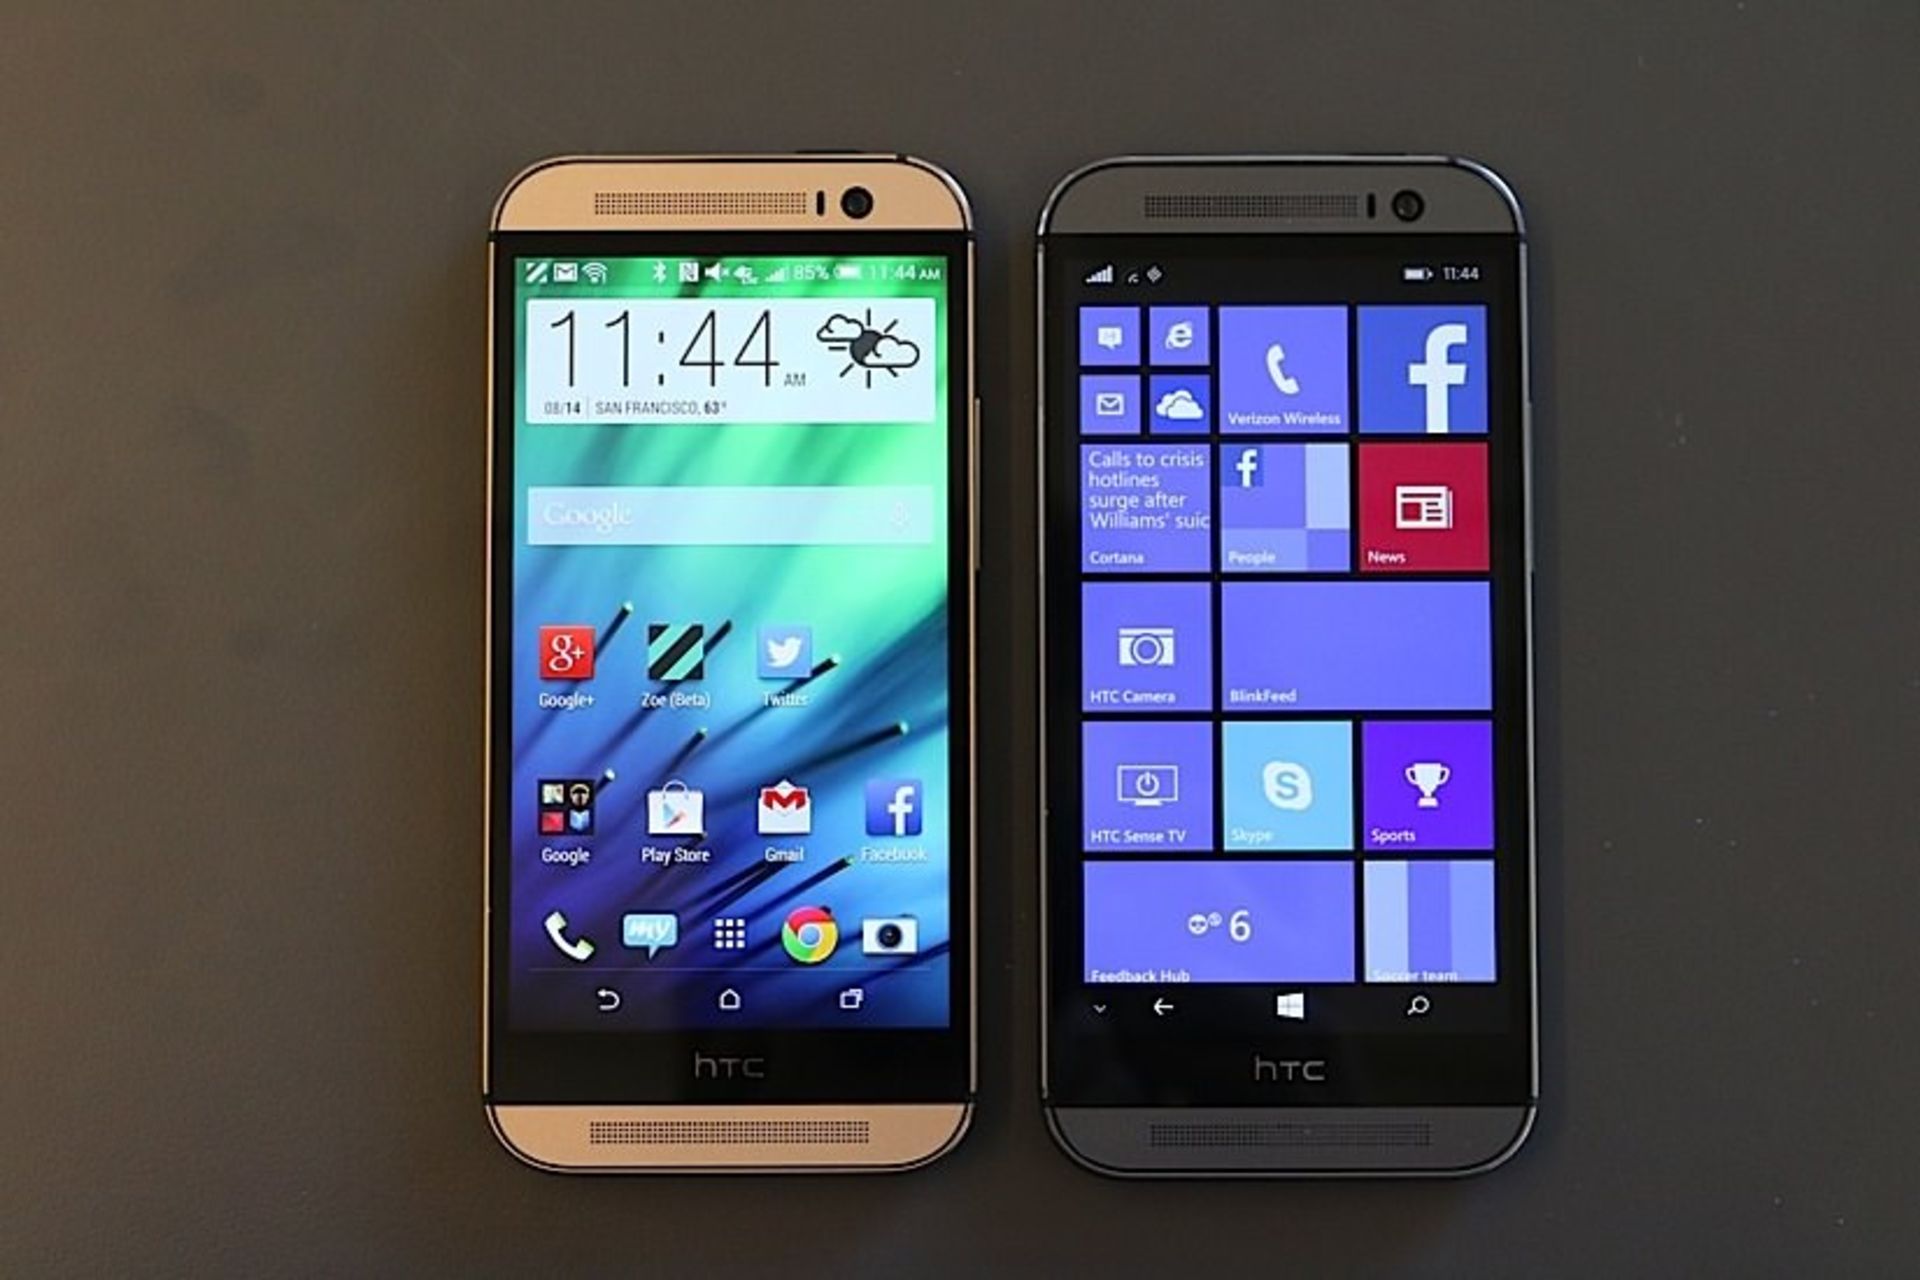 htc one m8 vs htc one m8 for windows phone 8